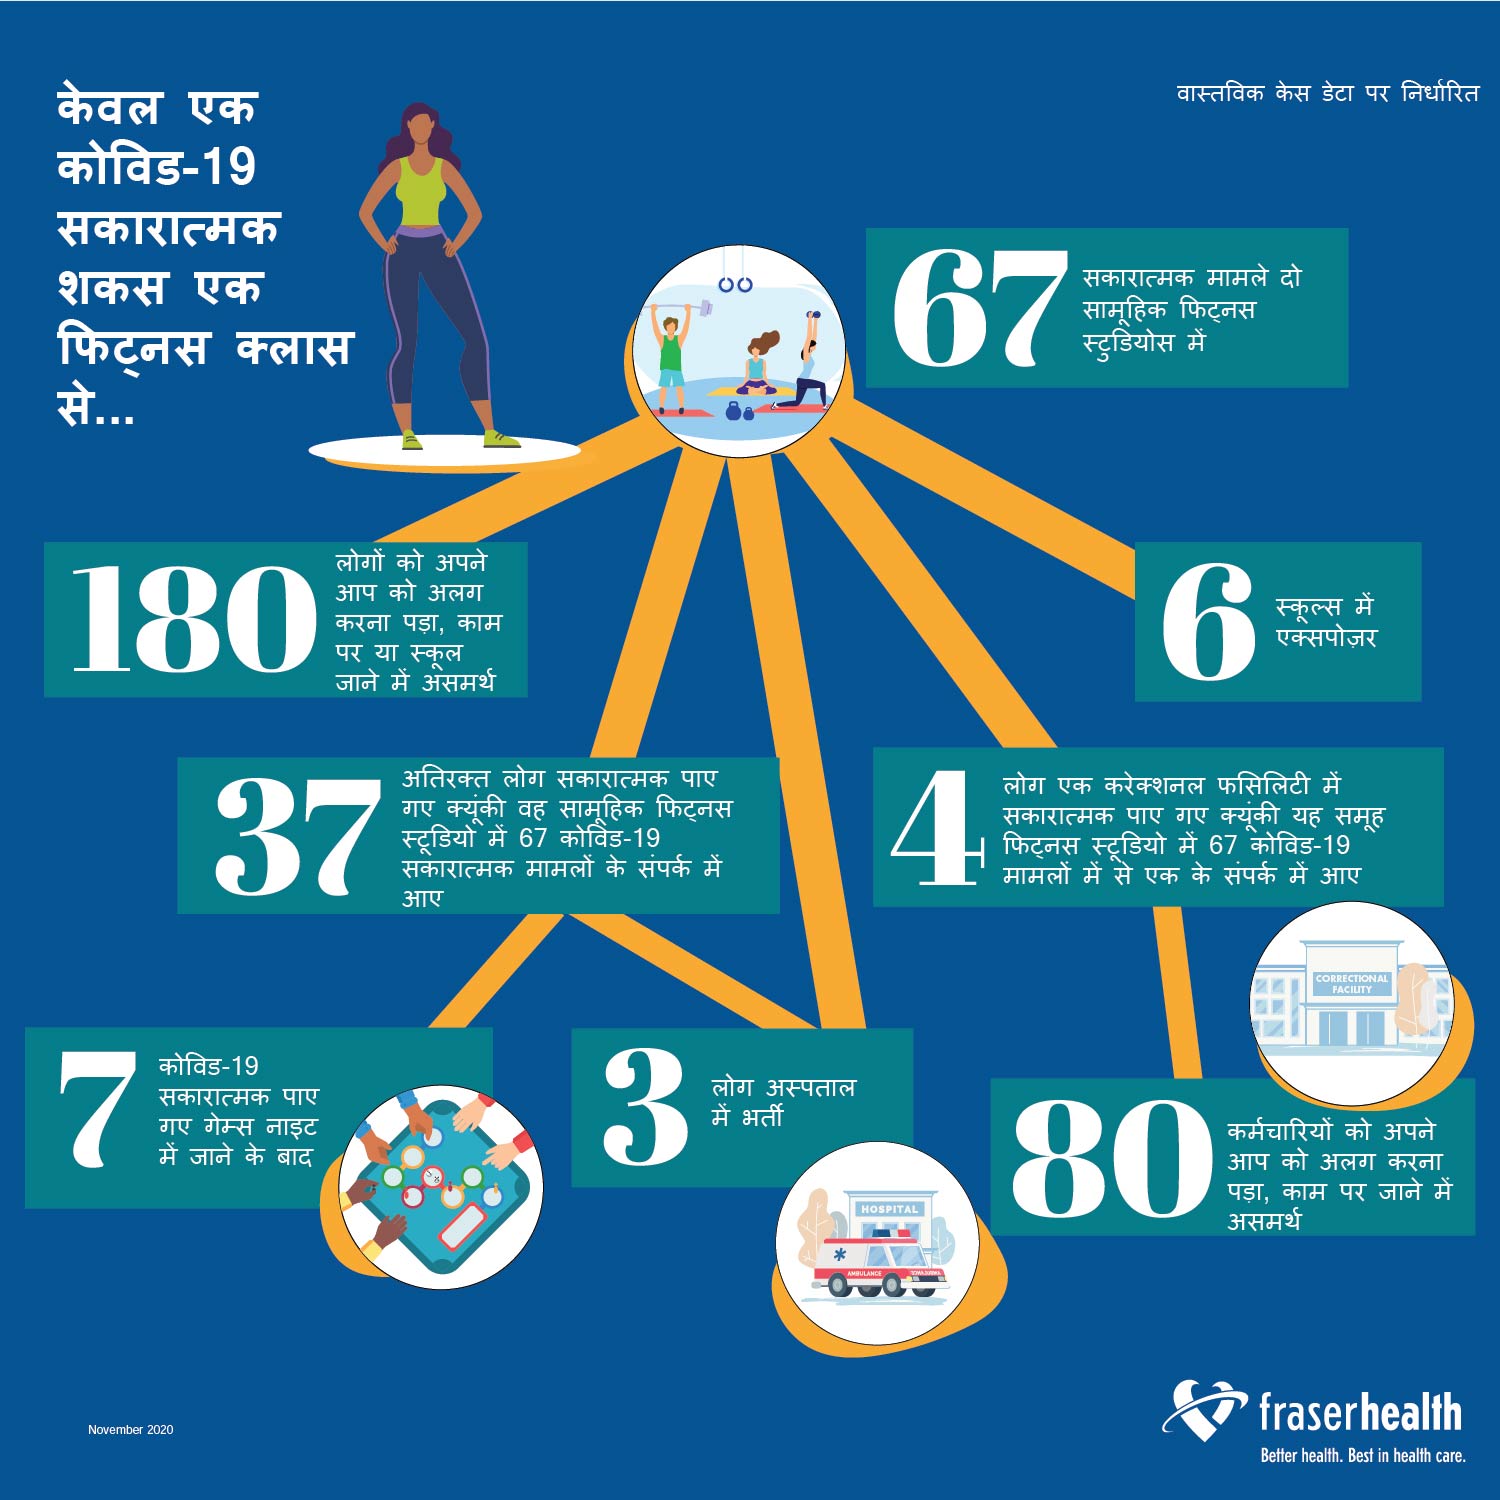 Fitness studio contact tracing infographic in Hindi